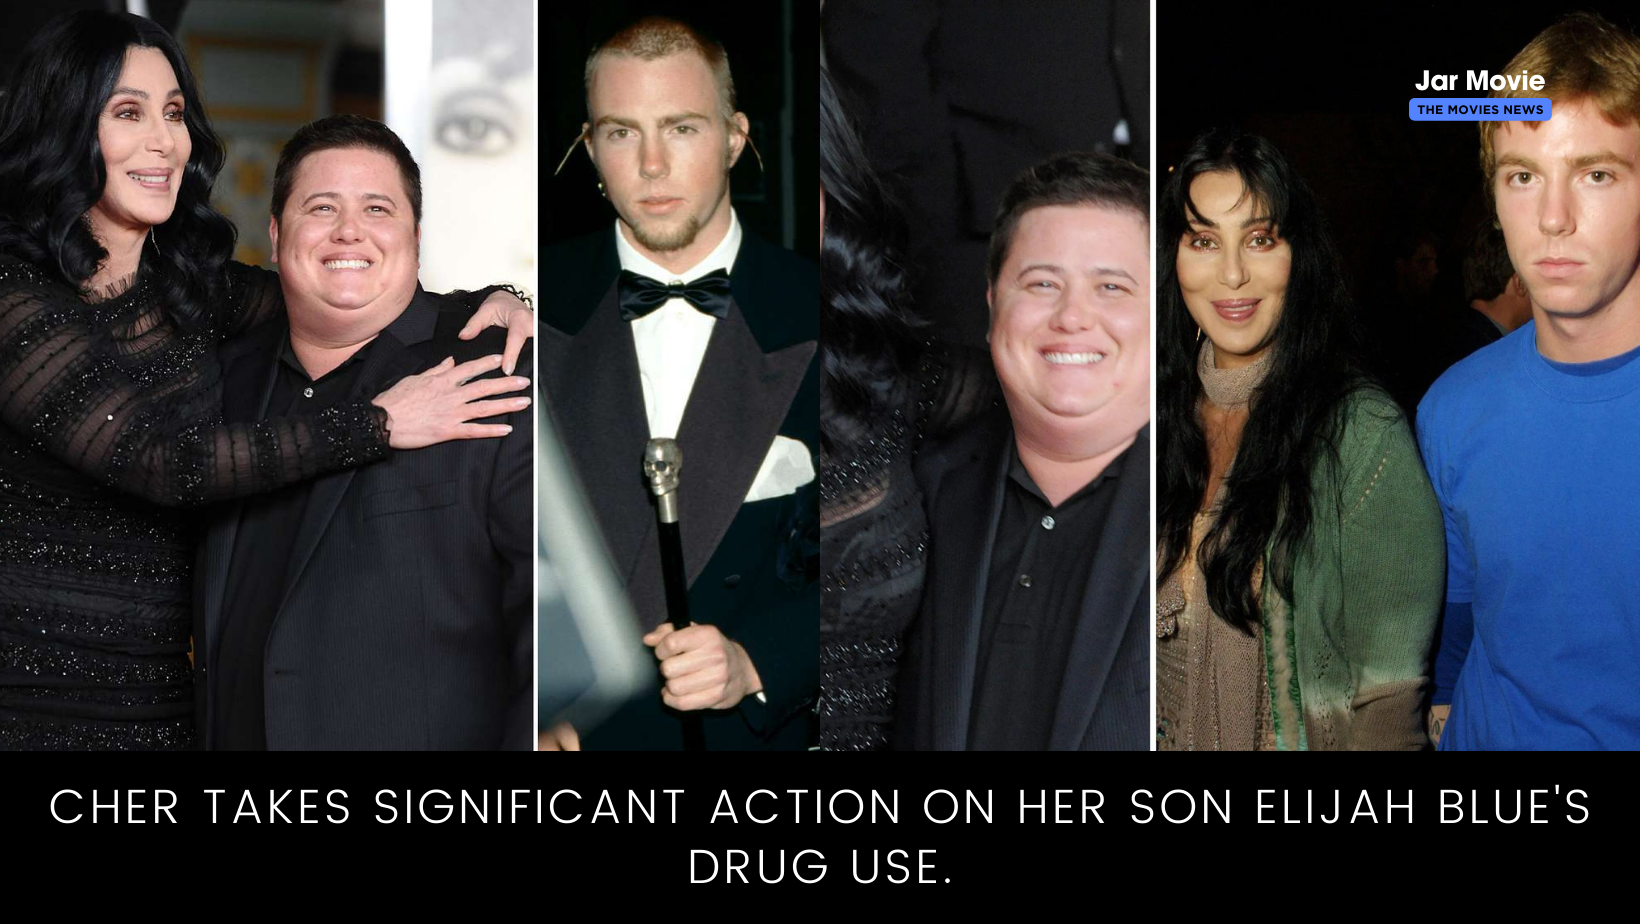 Cher takes significant action on her son Elijah Blue's drug use.